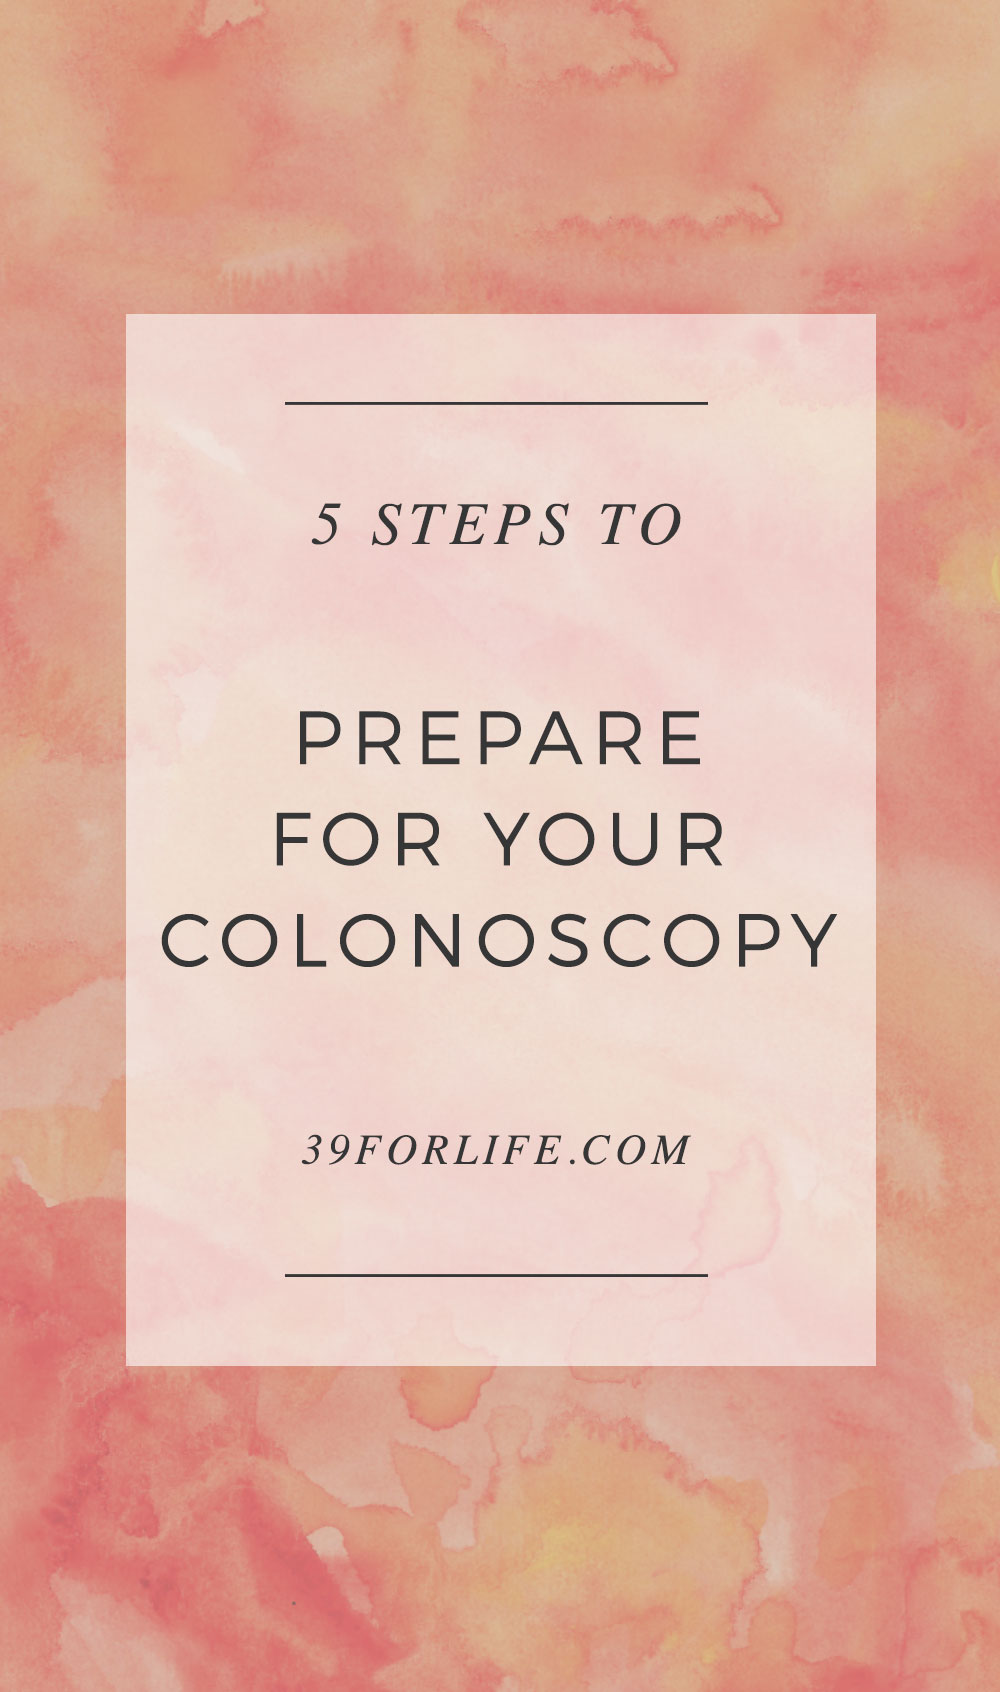 Prepping for a colonoscopy causes almost anxiety as the procedure itself. Here's how to ease the discomfort of prep.